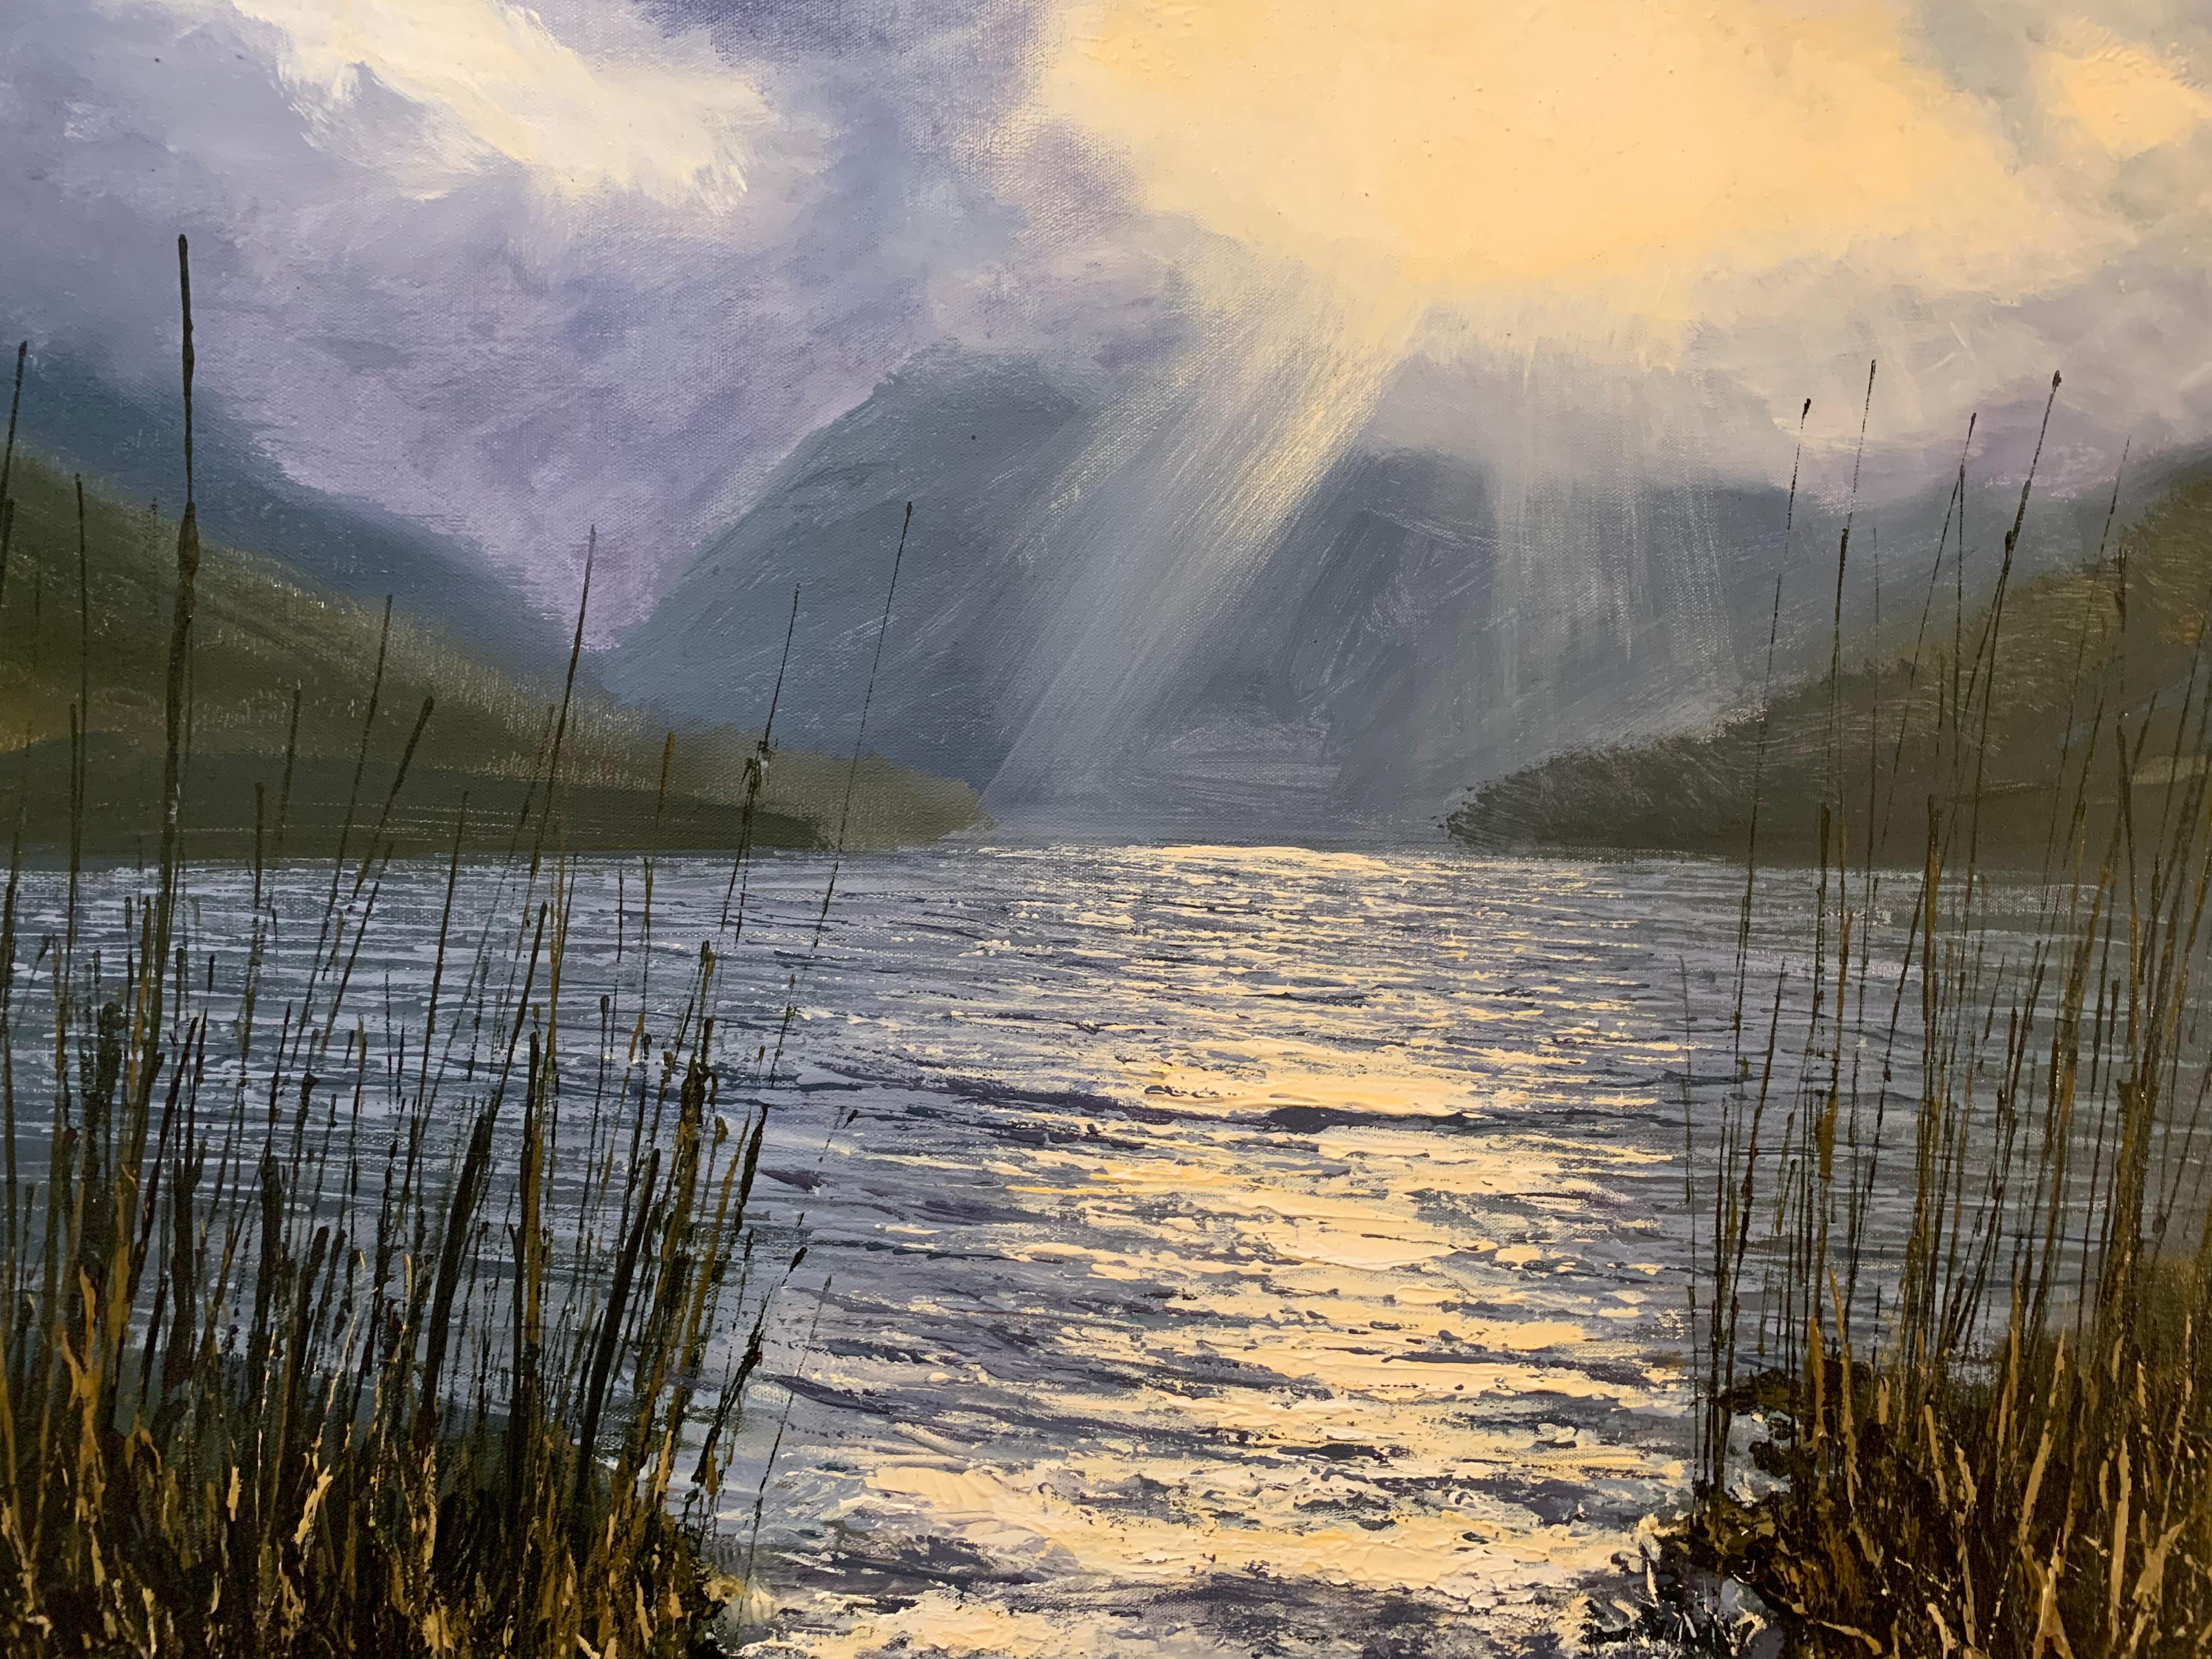 This oil painting is a vivid interpretation of dramatic light reflecting on Lake Buttermere in the Lake District, by British En Plein Air Artist Colin Halliday. He captures the shimmering reflections beautifully by a controlled use of texture,